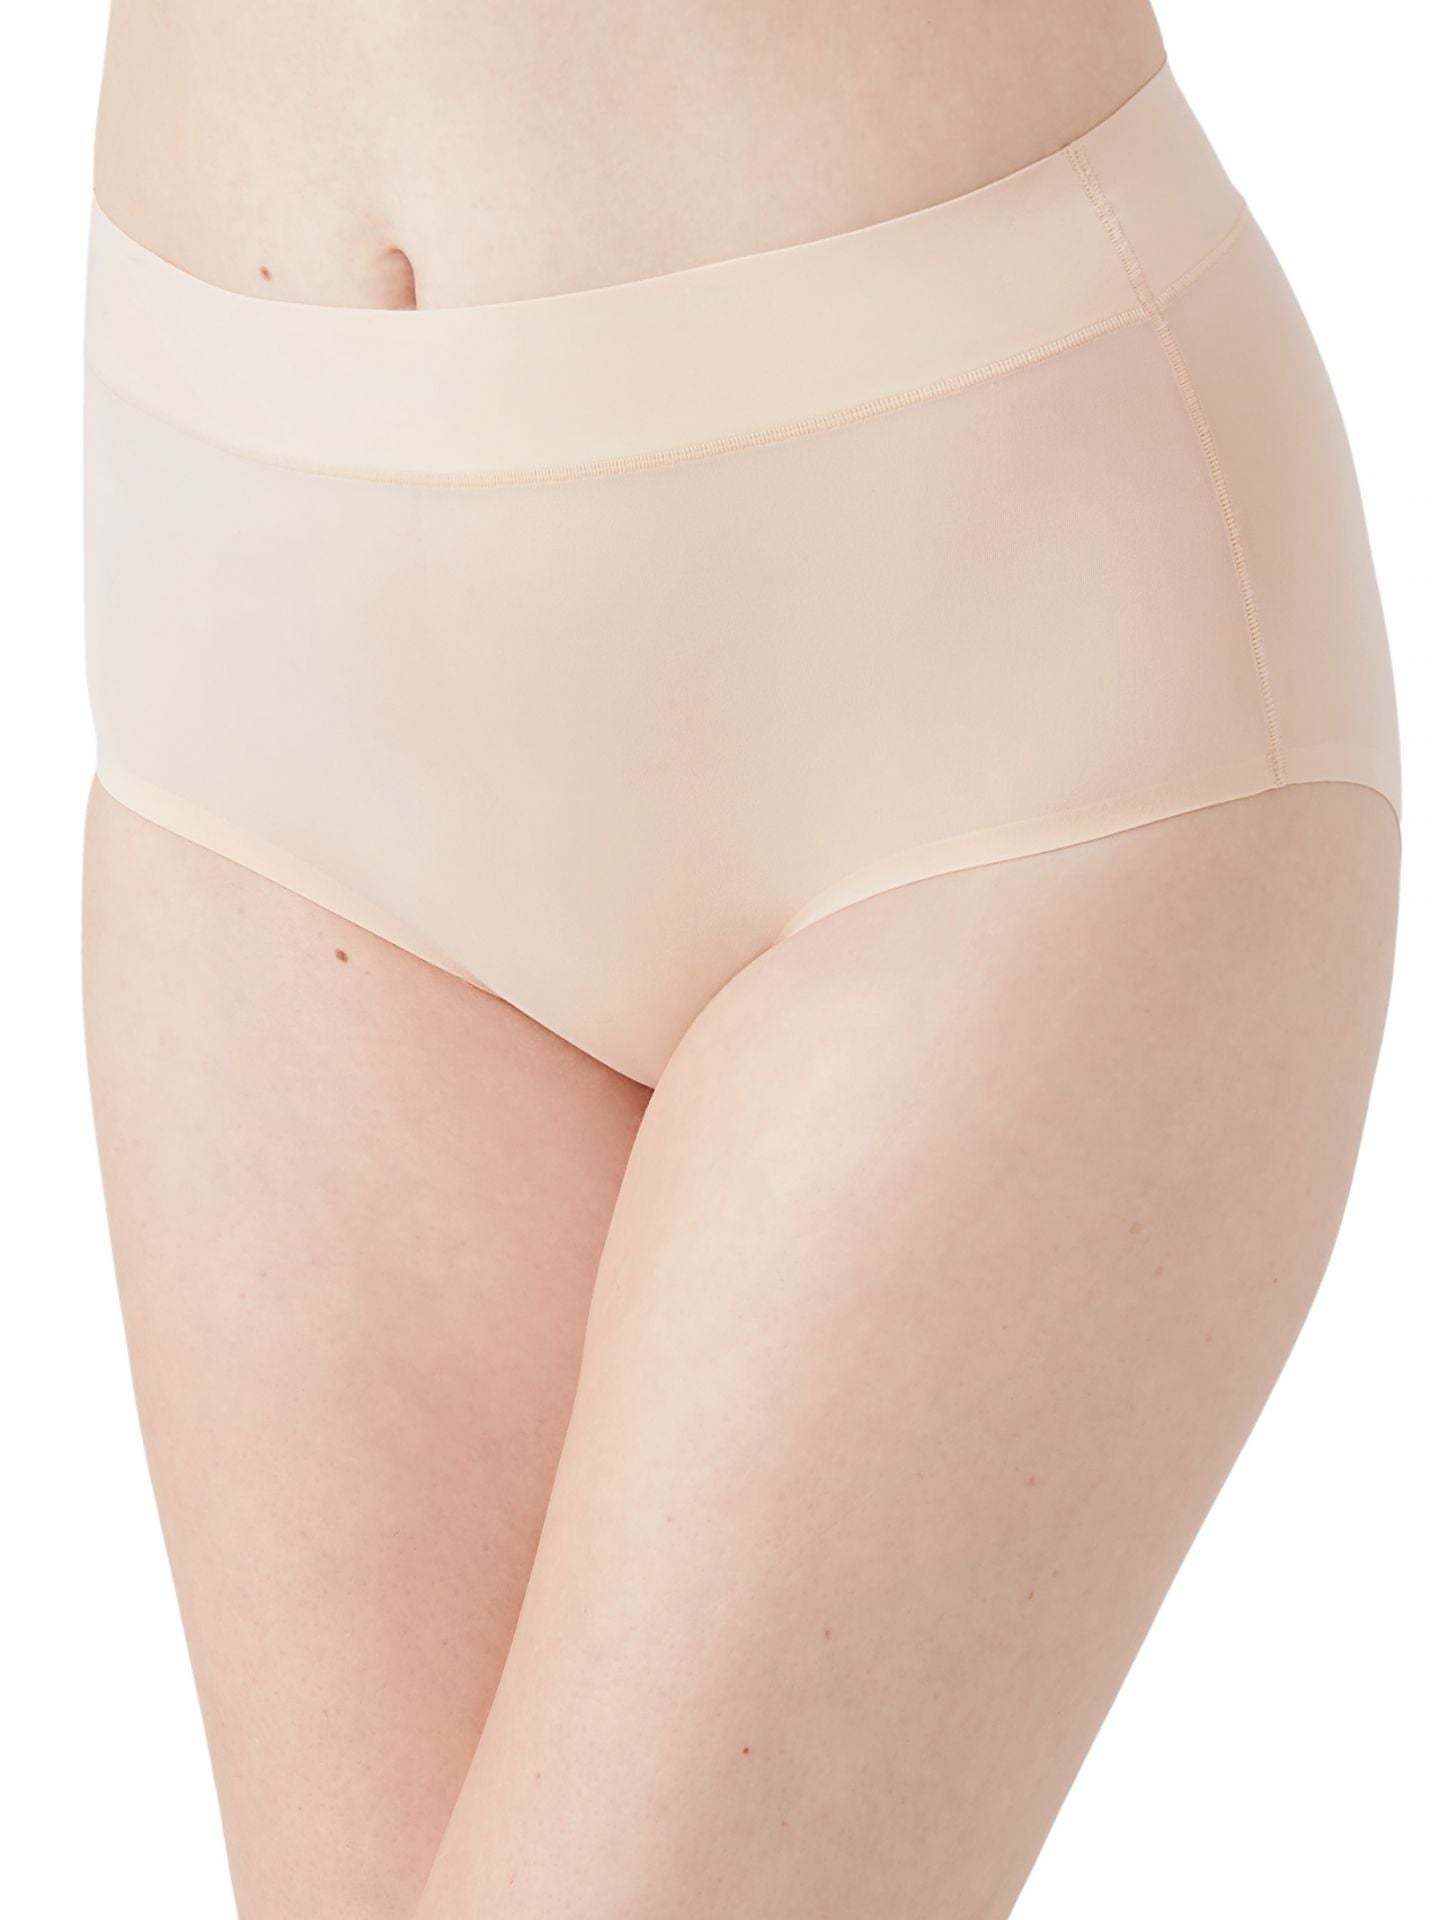 Women's At Ease Brief